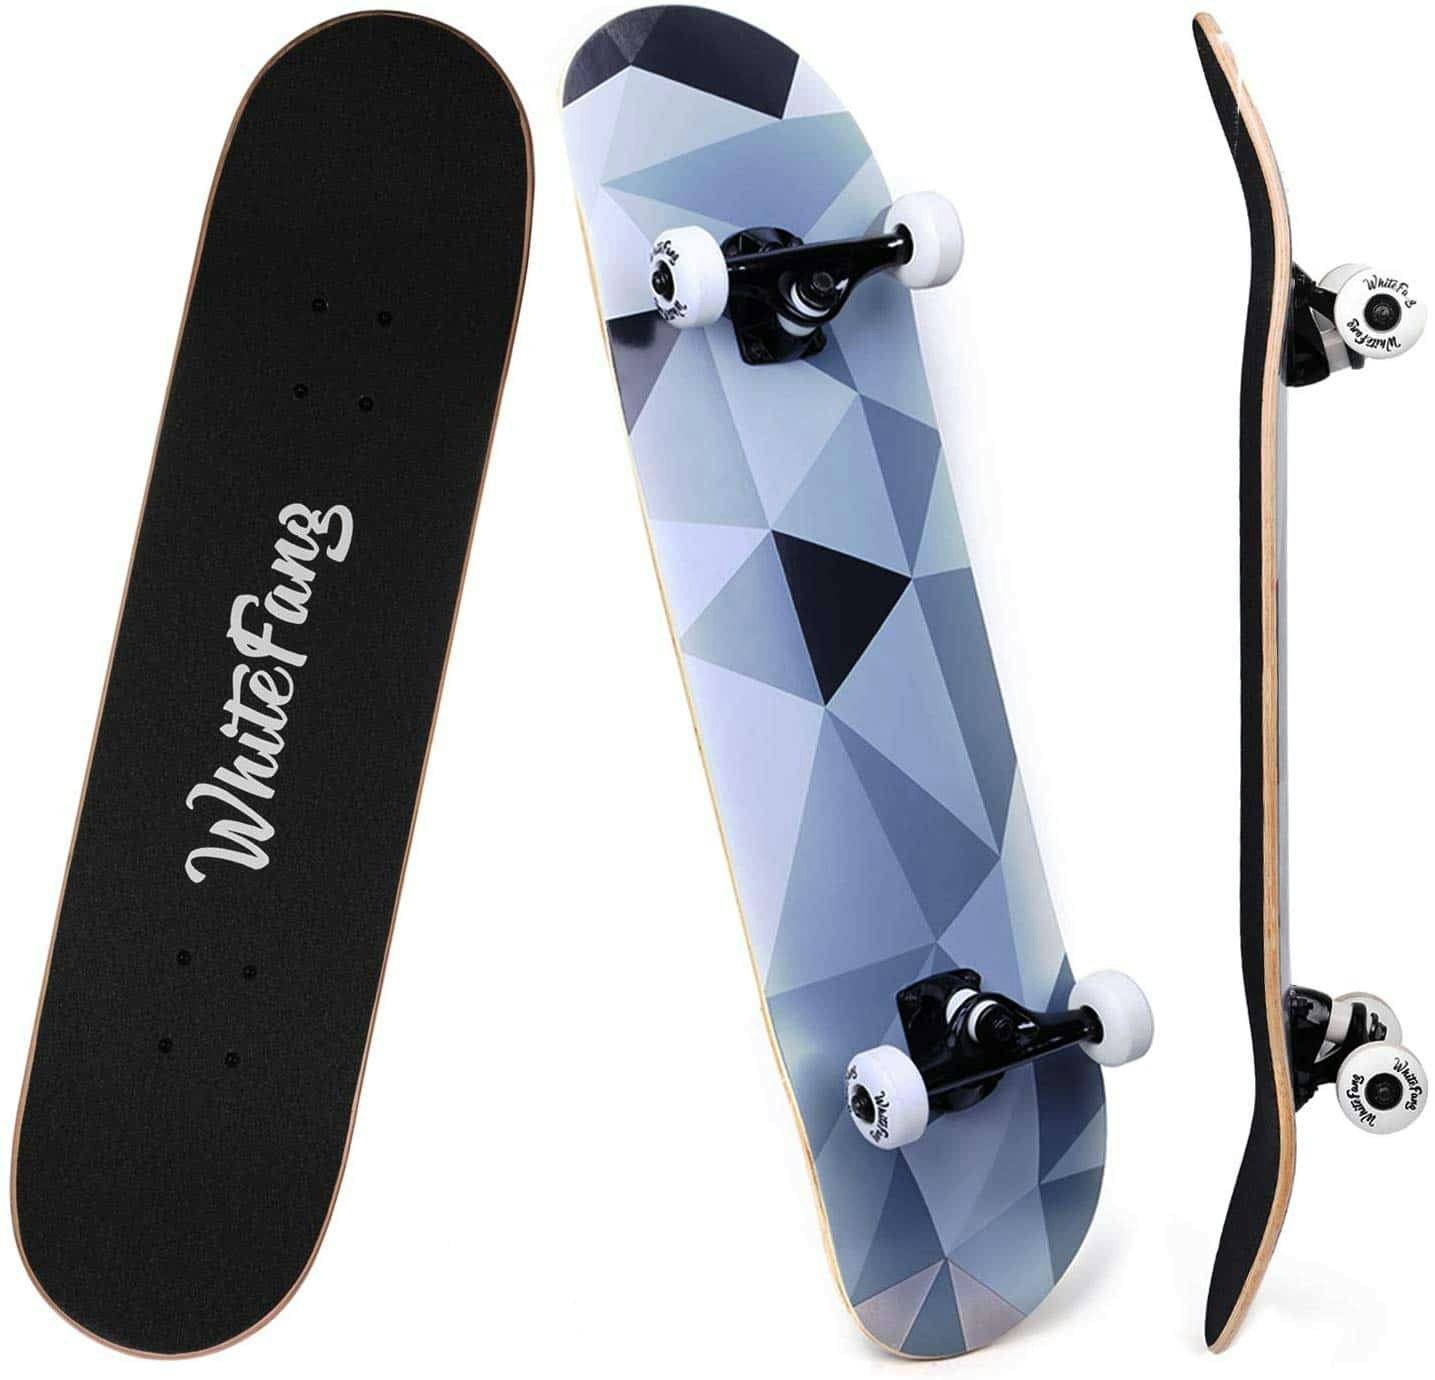 BESPORTBLE Skateboard Complete Mini Cruiser Retro Skateboard for Kids Teens Adults Led Light Up Wheels with All in One Skate T Tool for Beginners Blue 